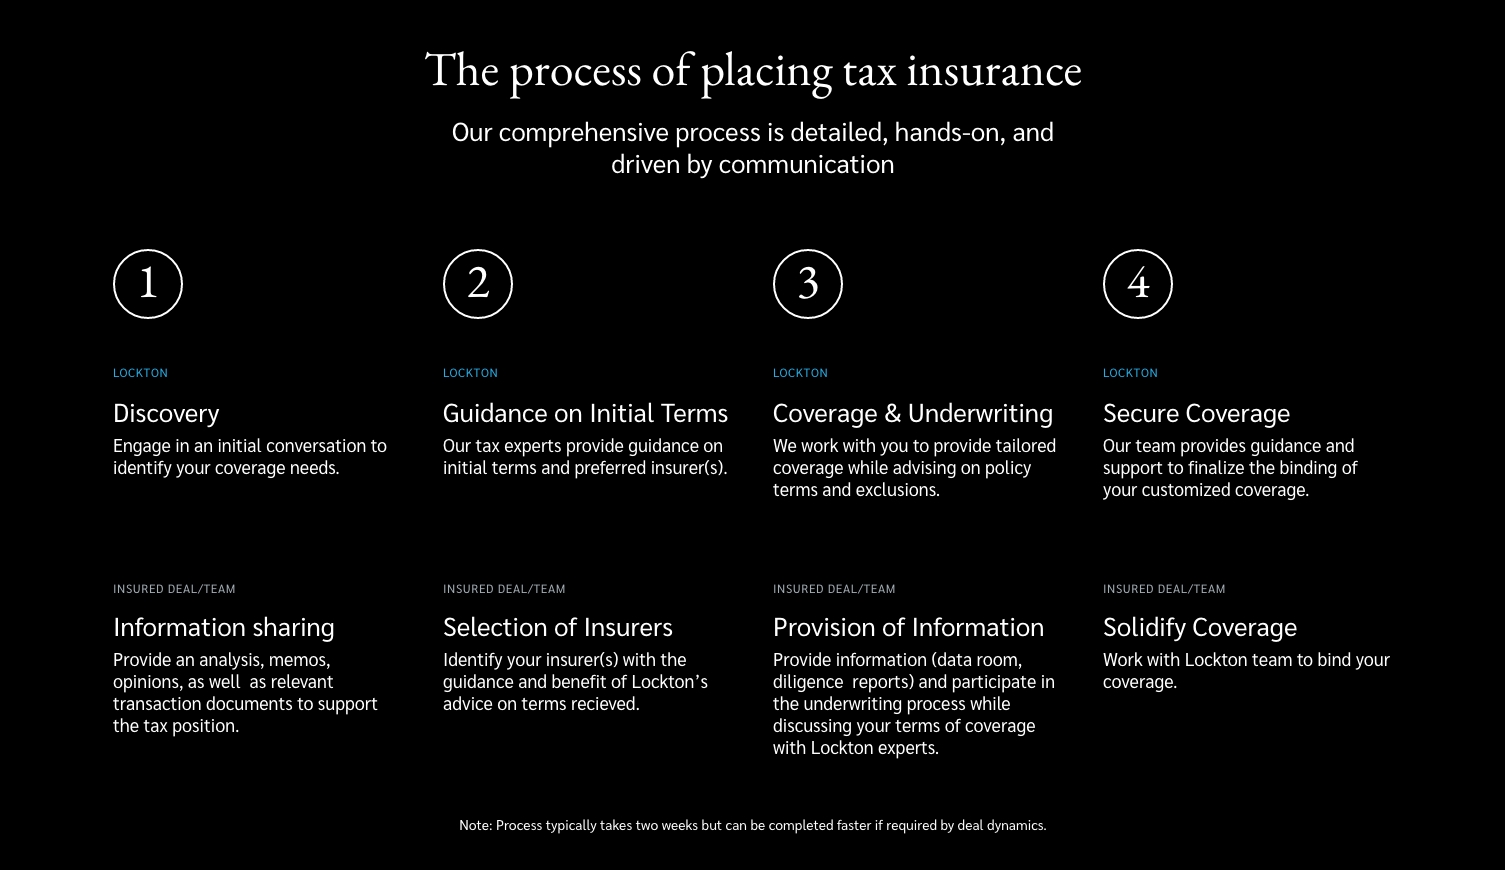 The Process of Placing Tax Insurance